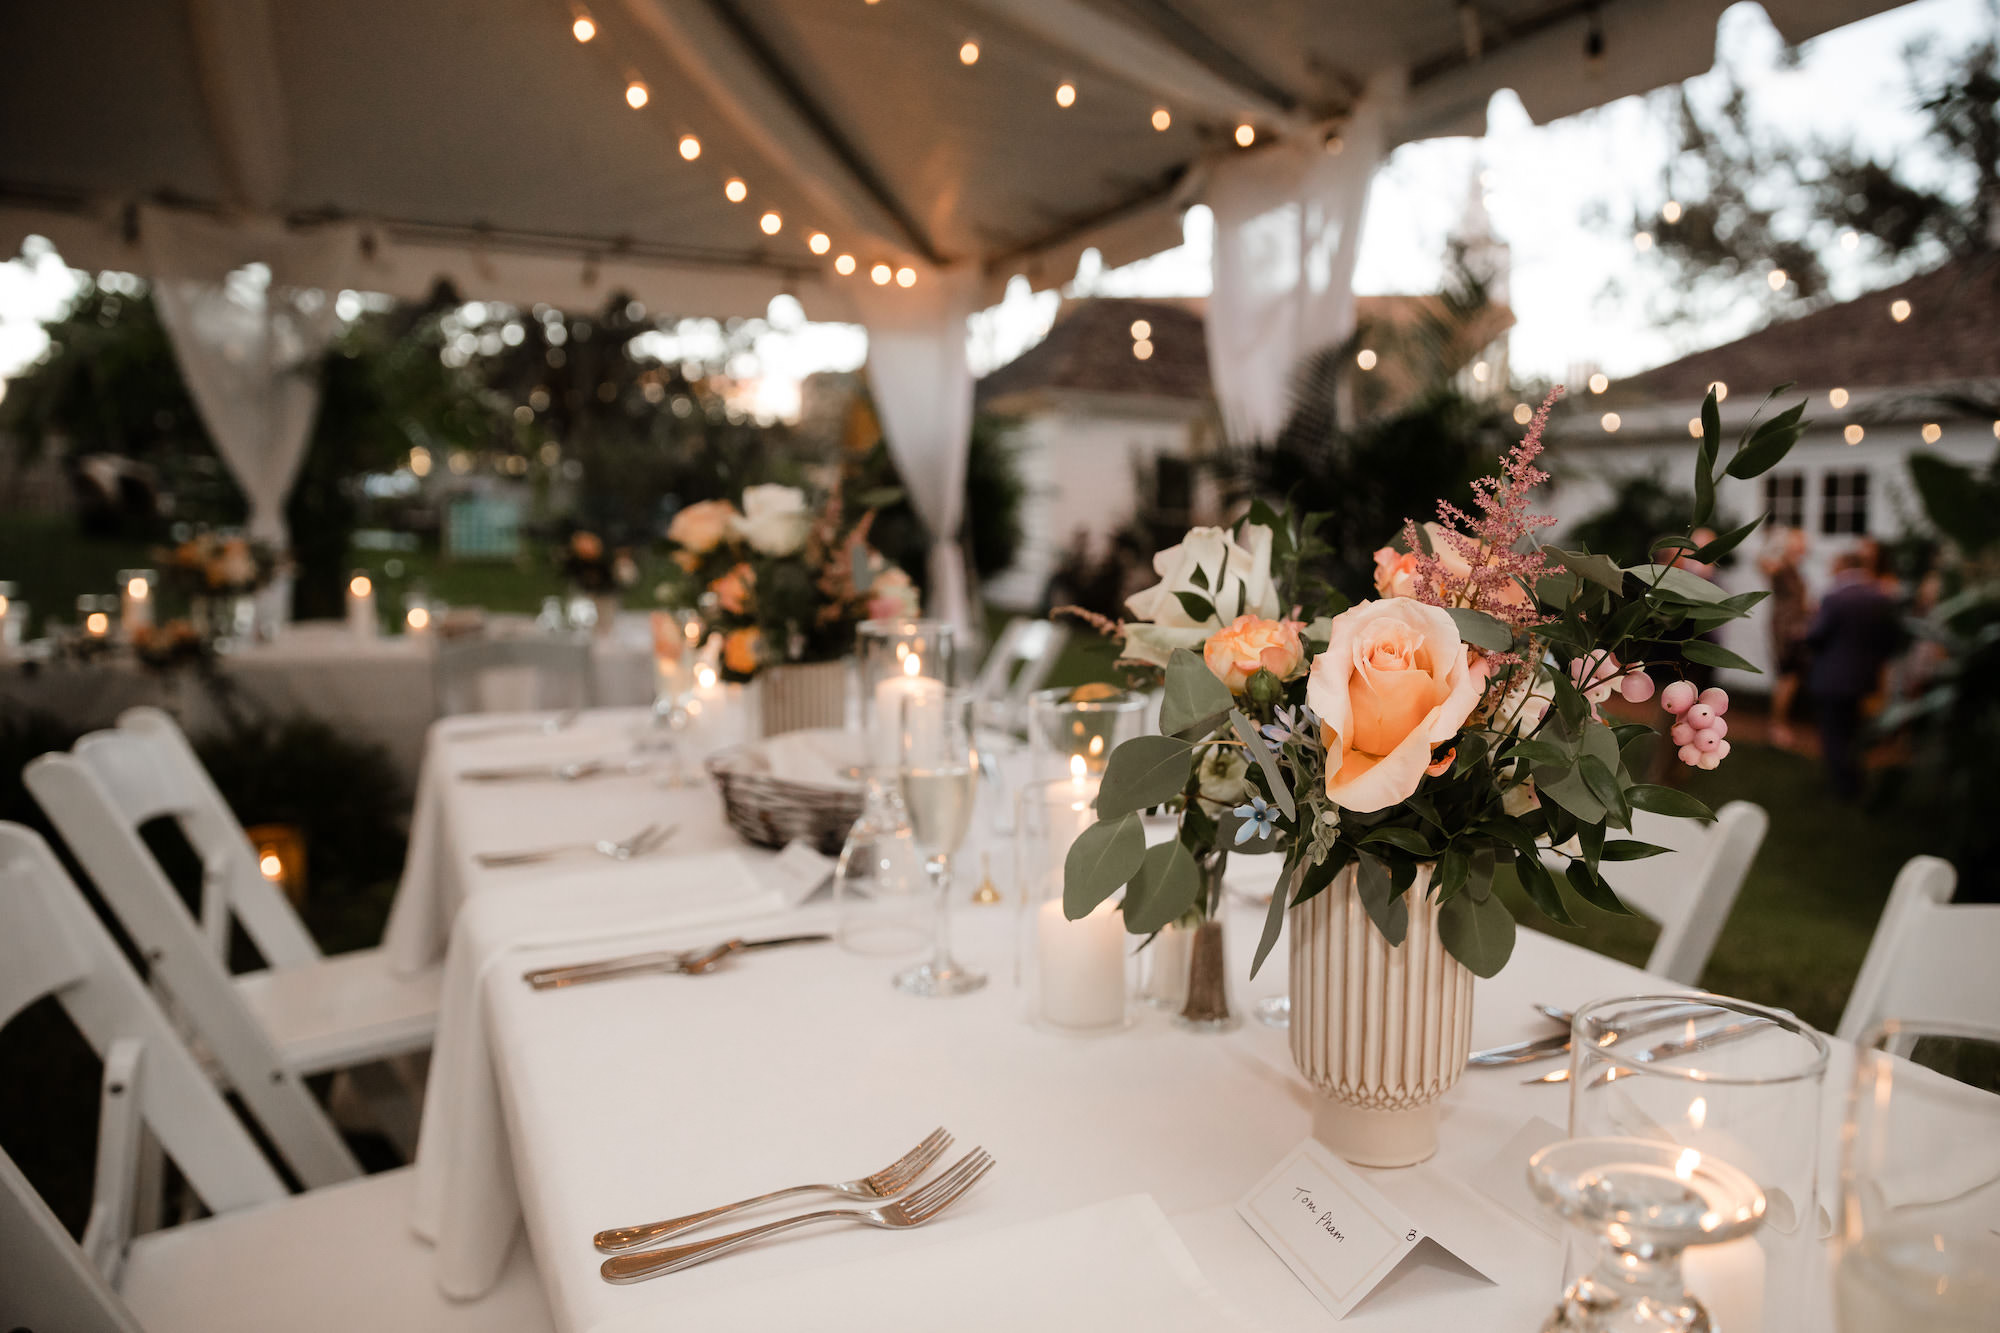 Orange and White Roses and Carnations with Ruscus and Eucalyptus Greenery Wedding Reception Centerpiece Inspiration | Tampa Bay Planner Wilder Mind Events